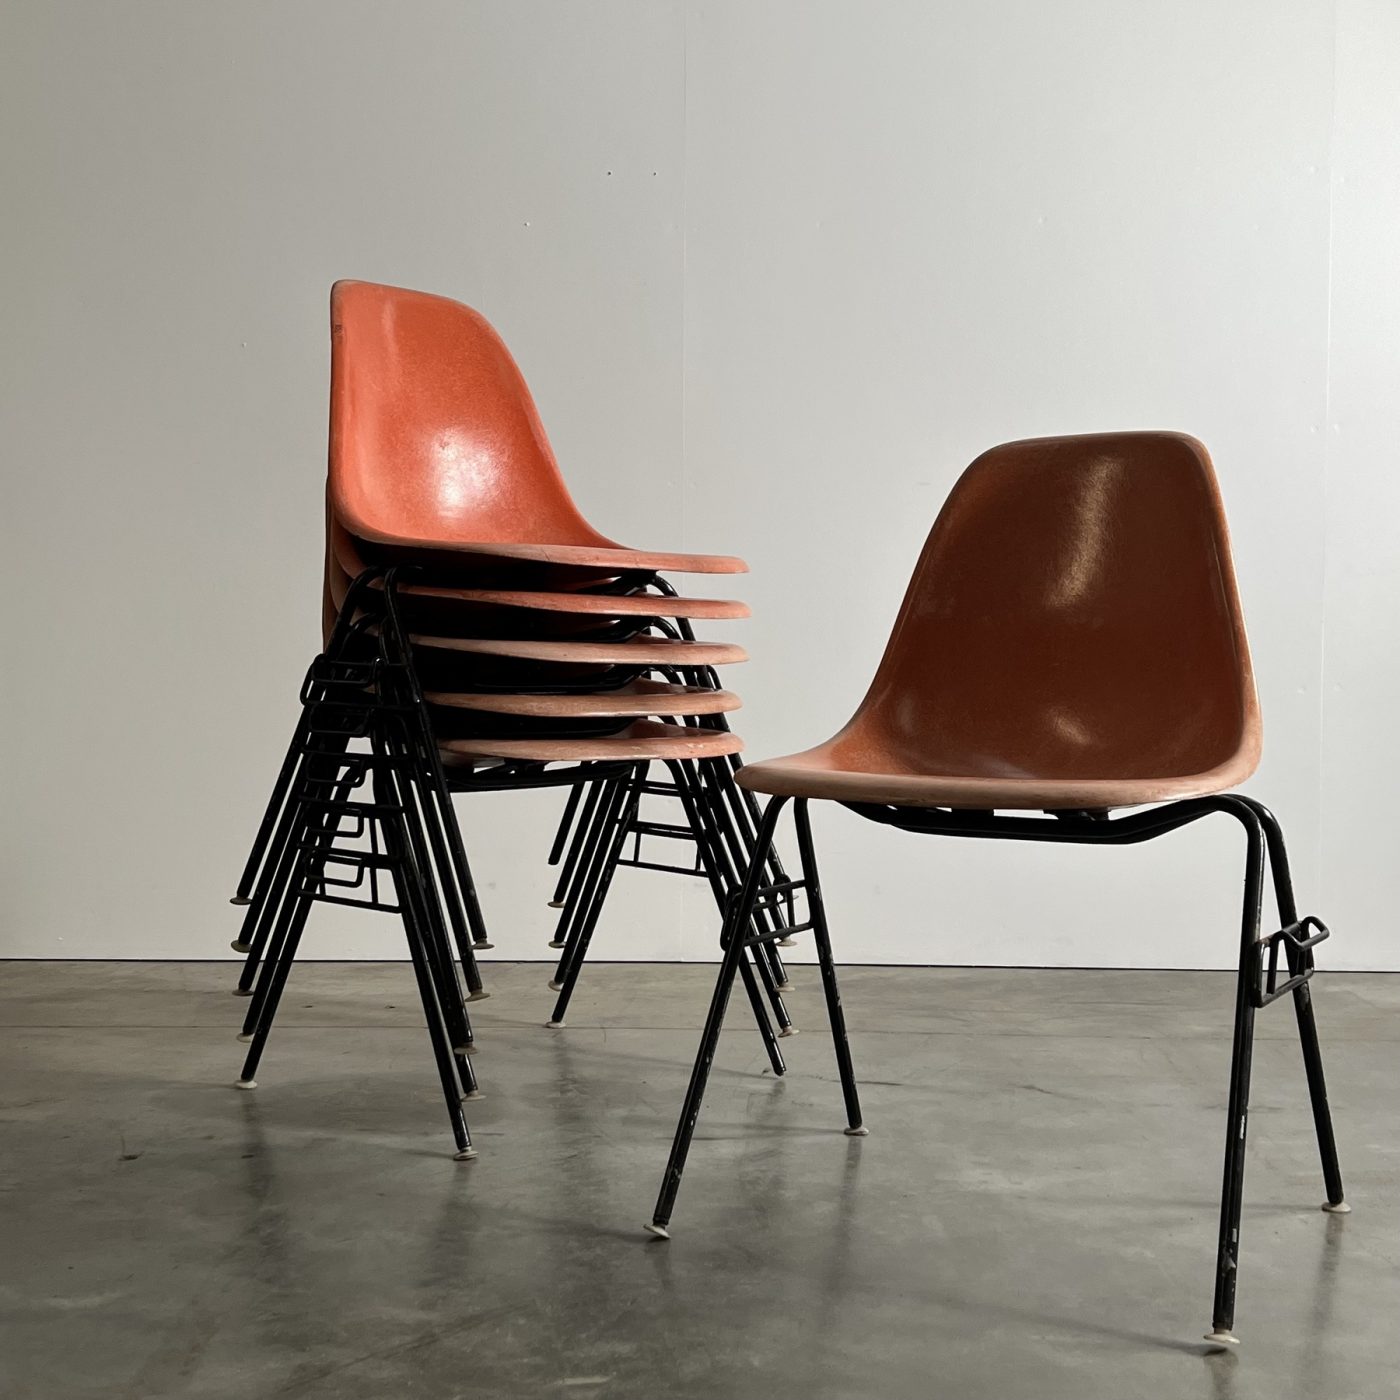 objet-eames-chairs0004